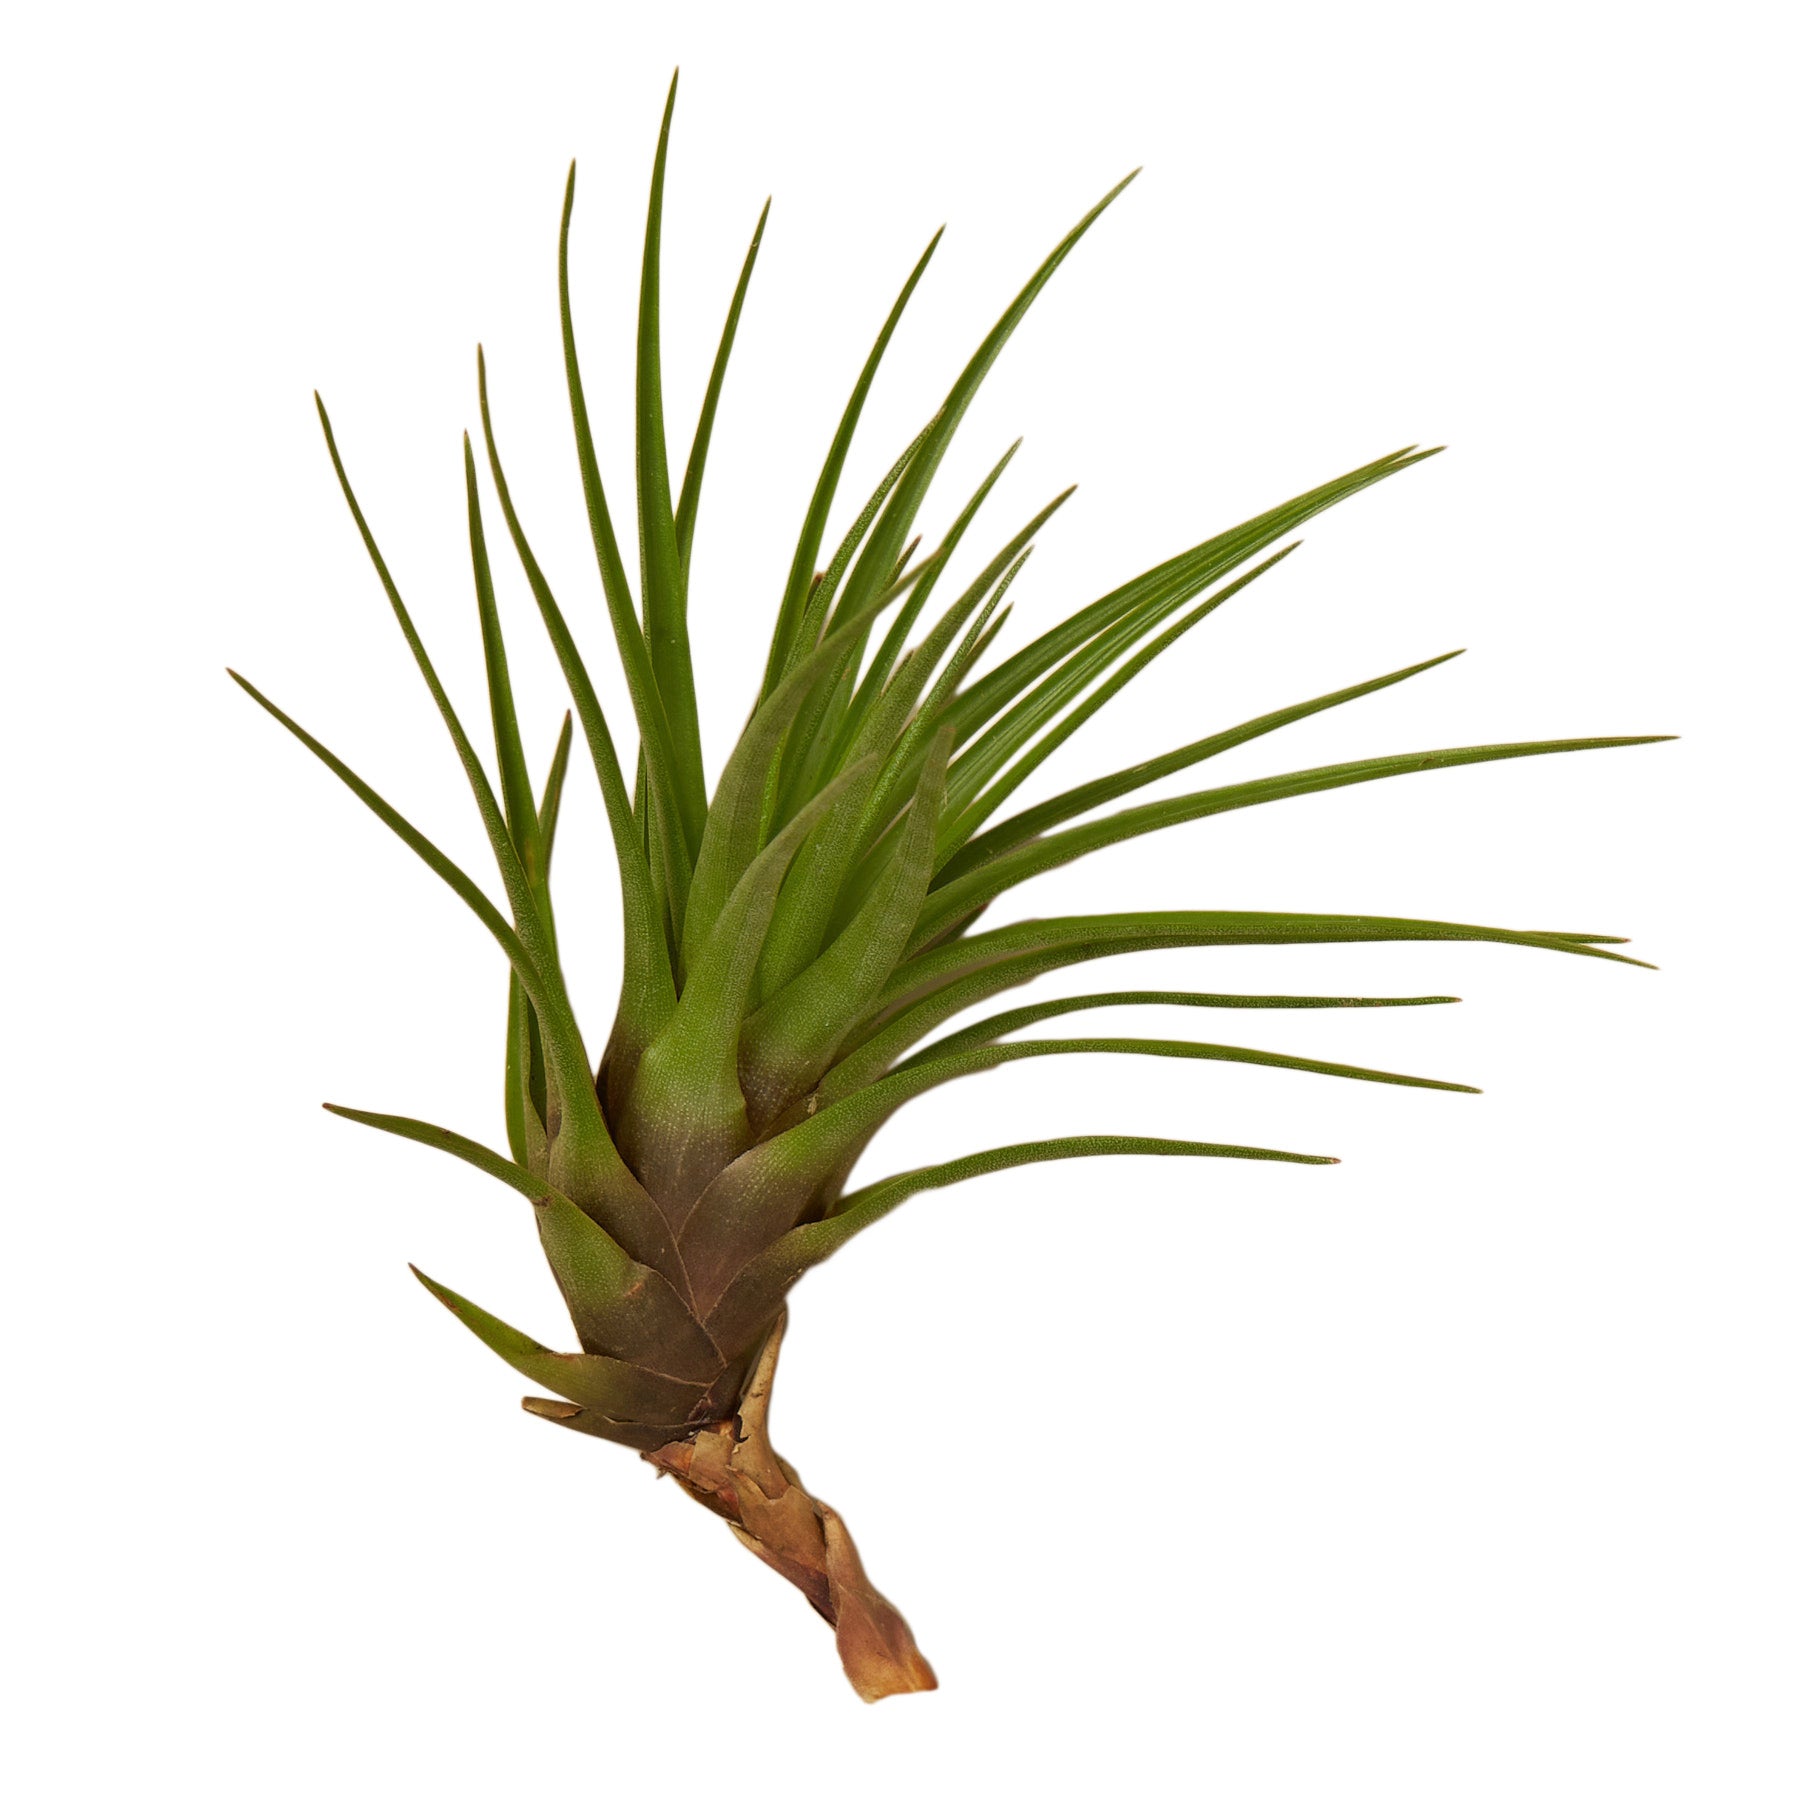 A small air plant on a white background.